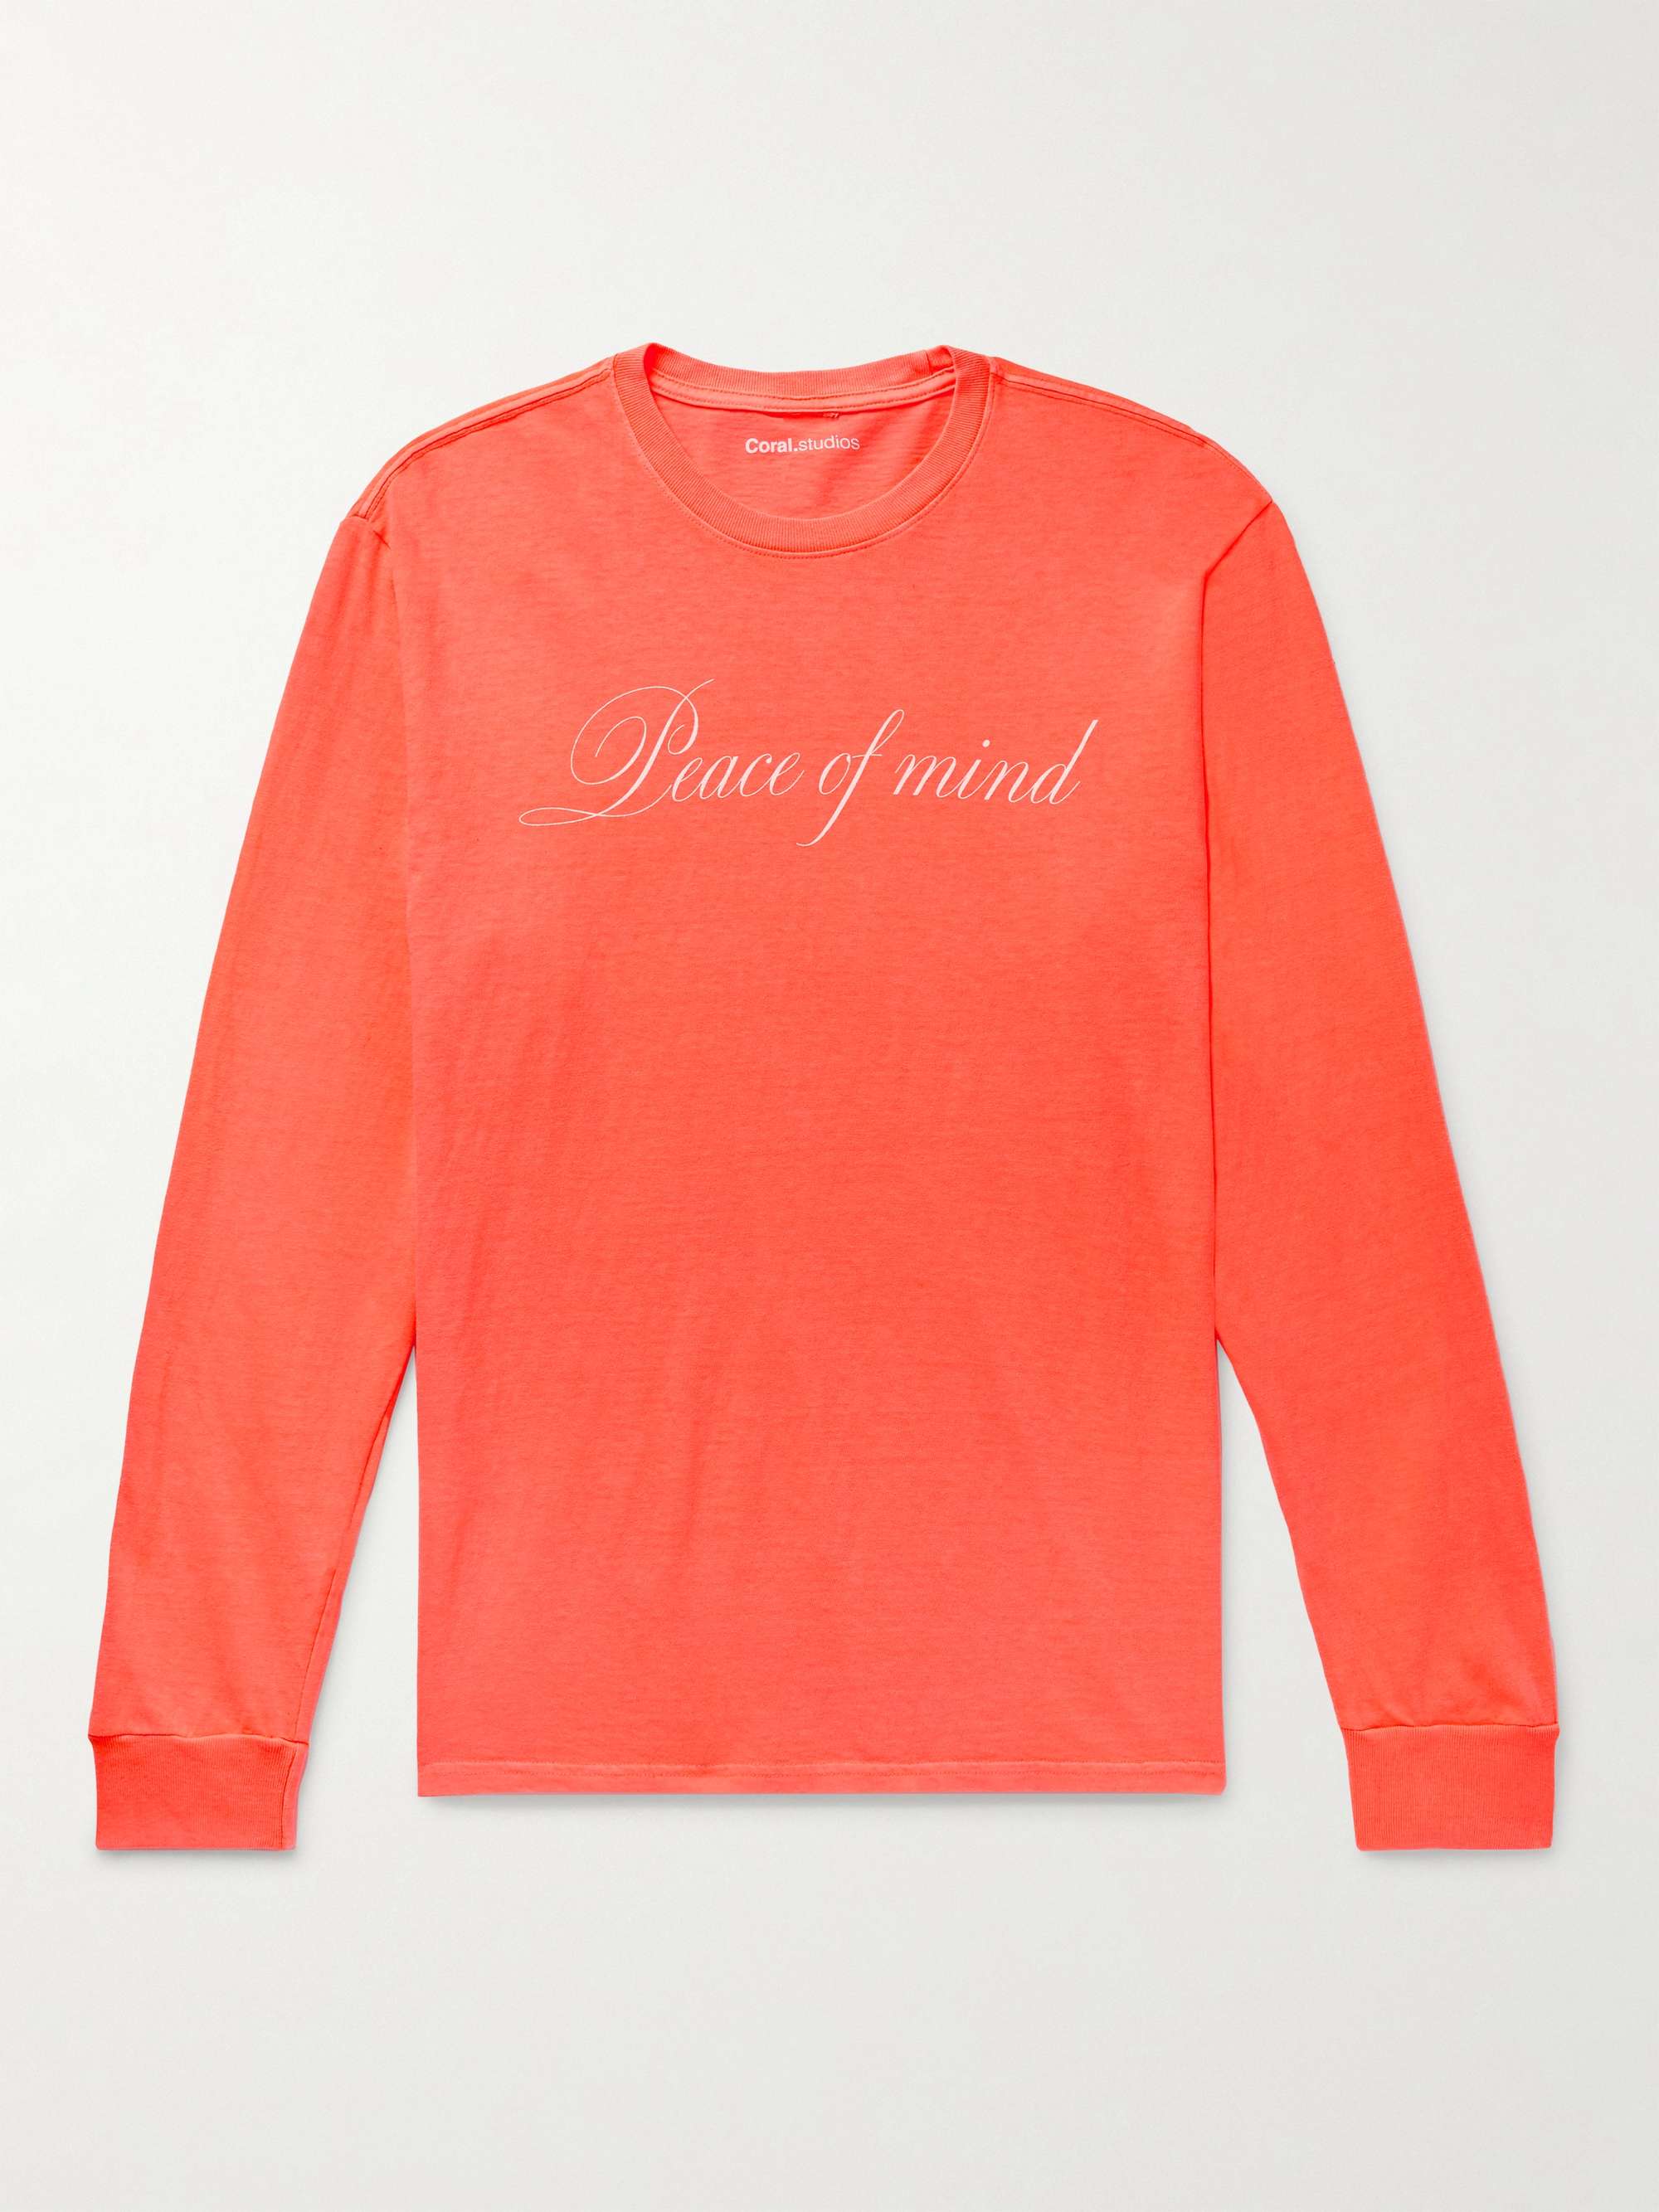 CORAL STUDIOS Printed Cotton-Jersey T-Shirt